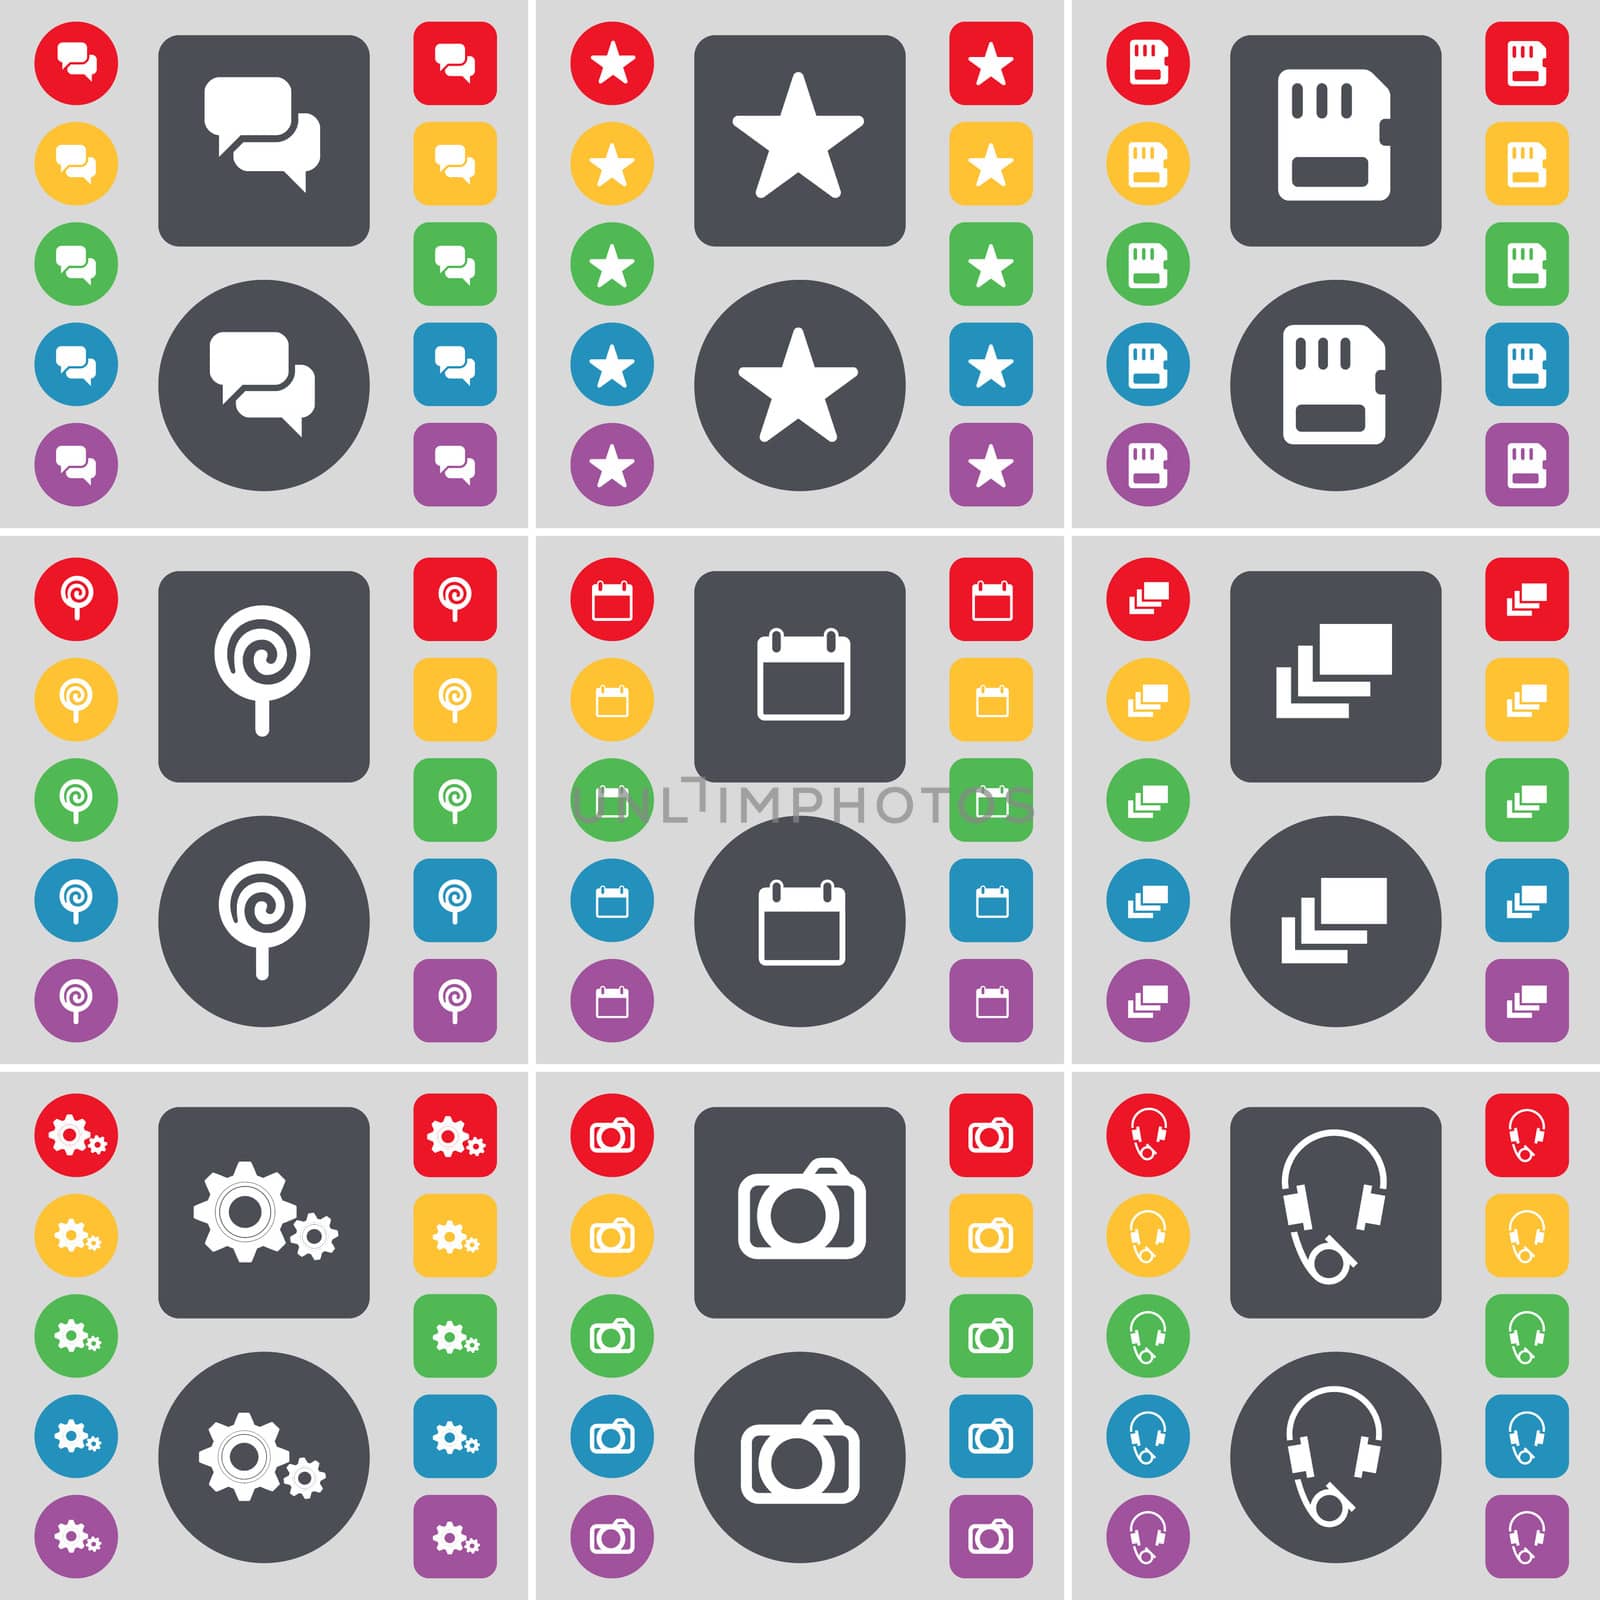 Chat, Star, SIM card, Lollipop, Calendar, Gallery, Gear, Camera, Headphones icon symbol. A large set of flat, colored buttons for your design. illustration